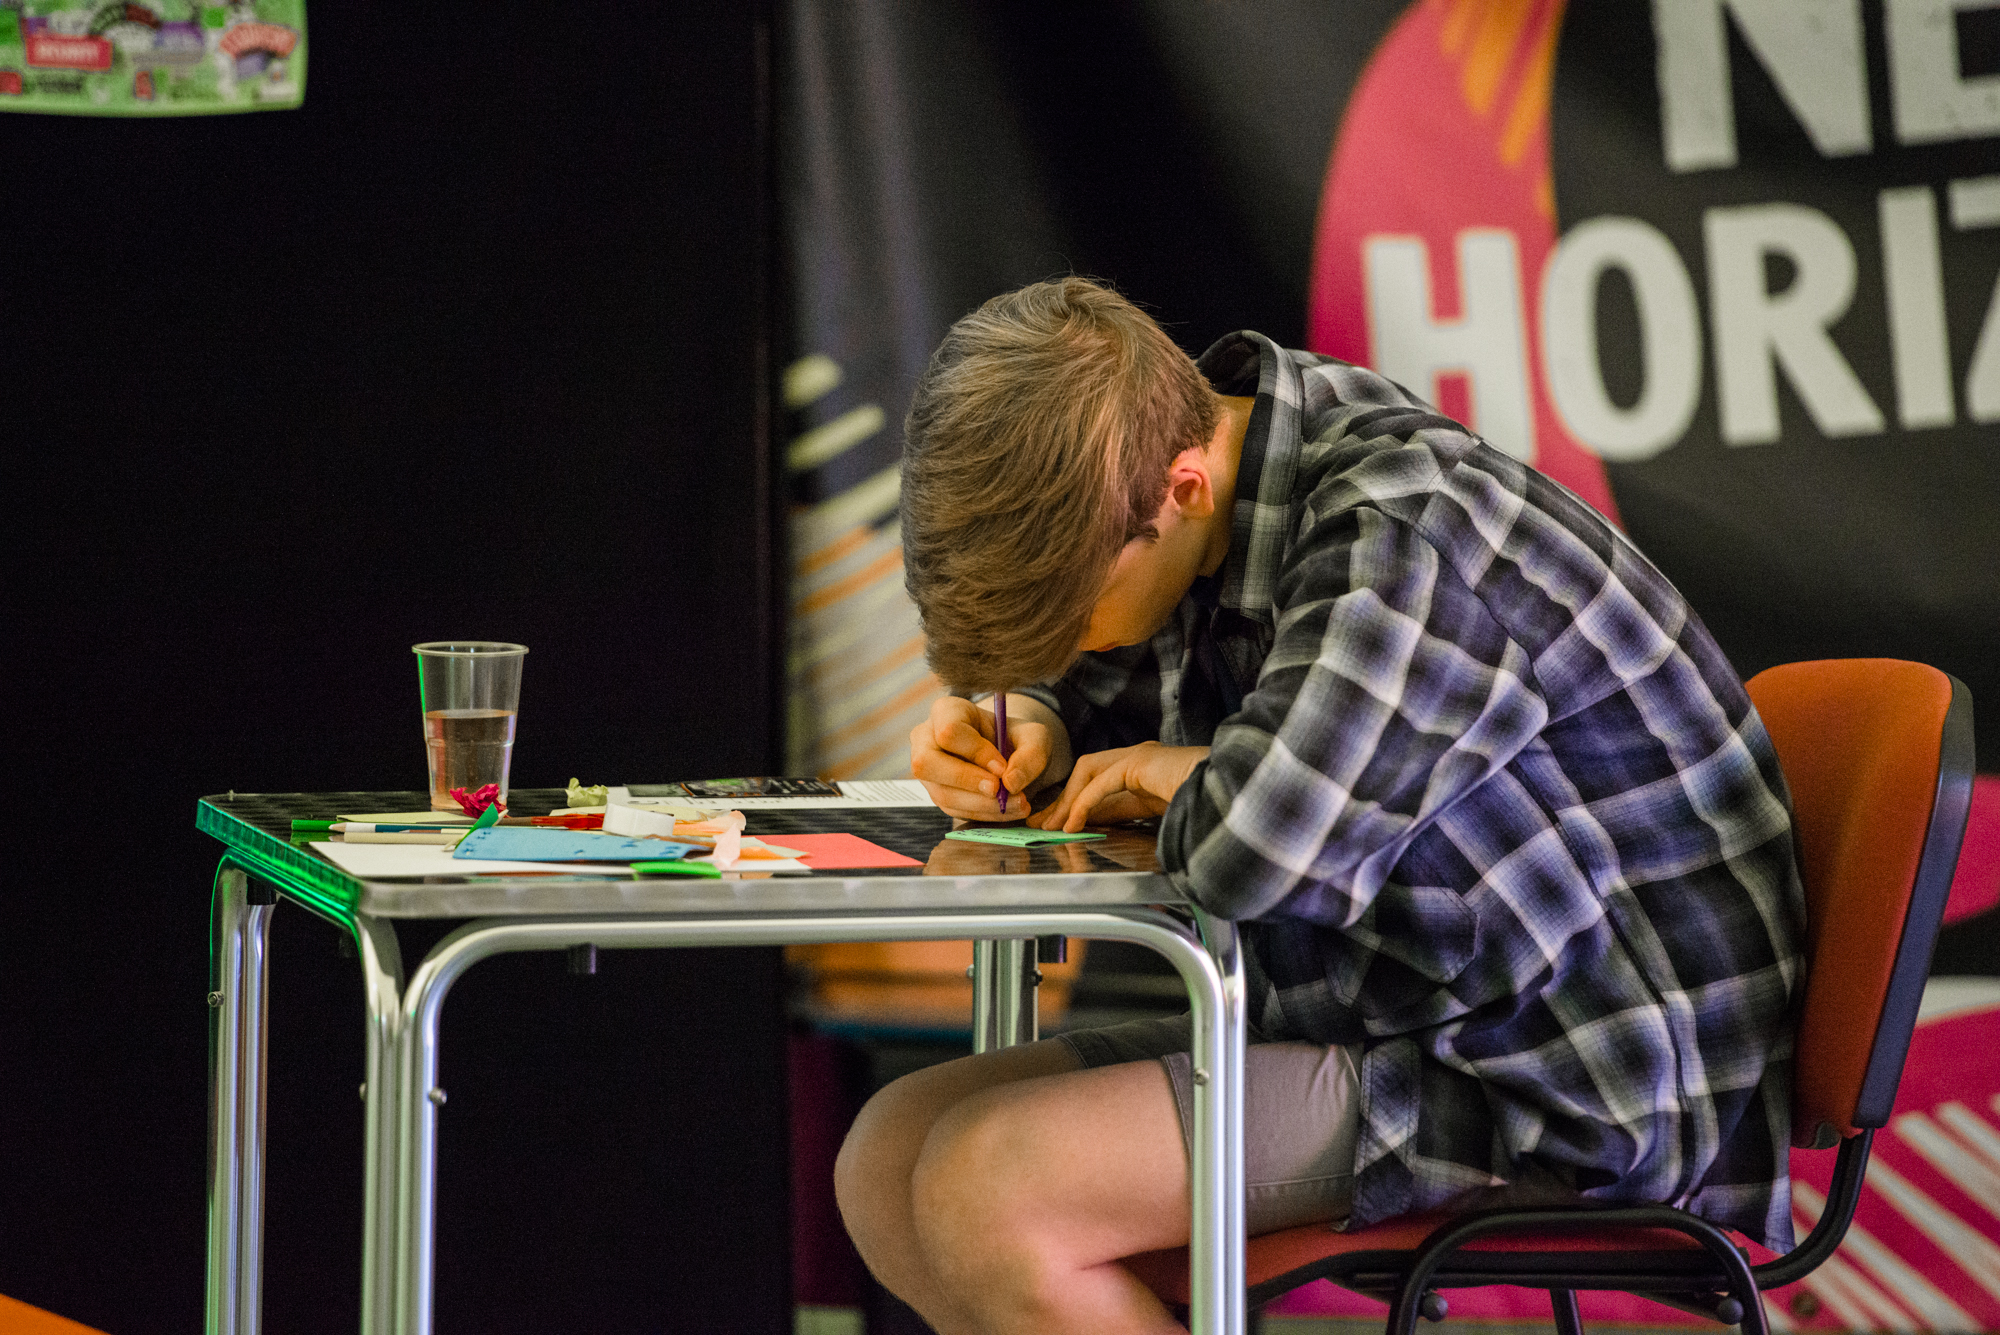 Photo of a young person, hunched over as he writes on a desk.